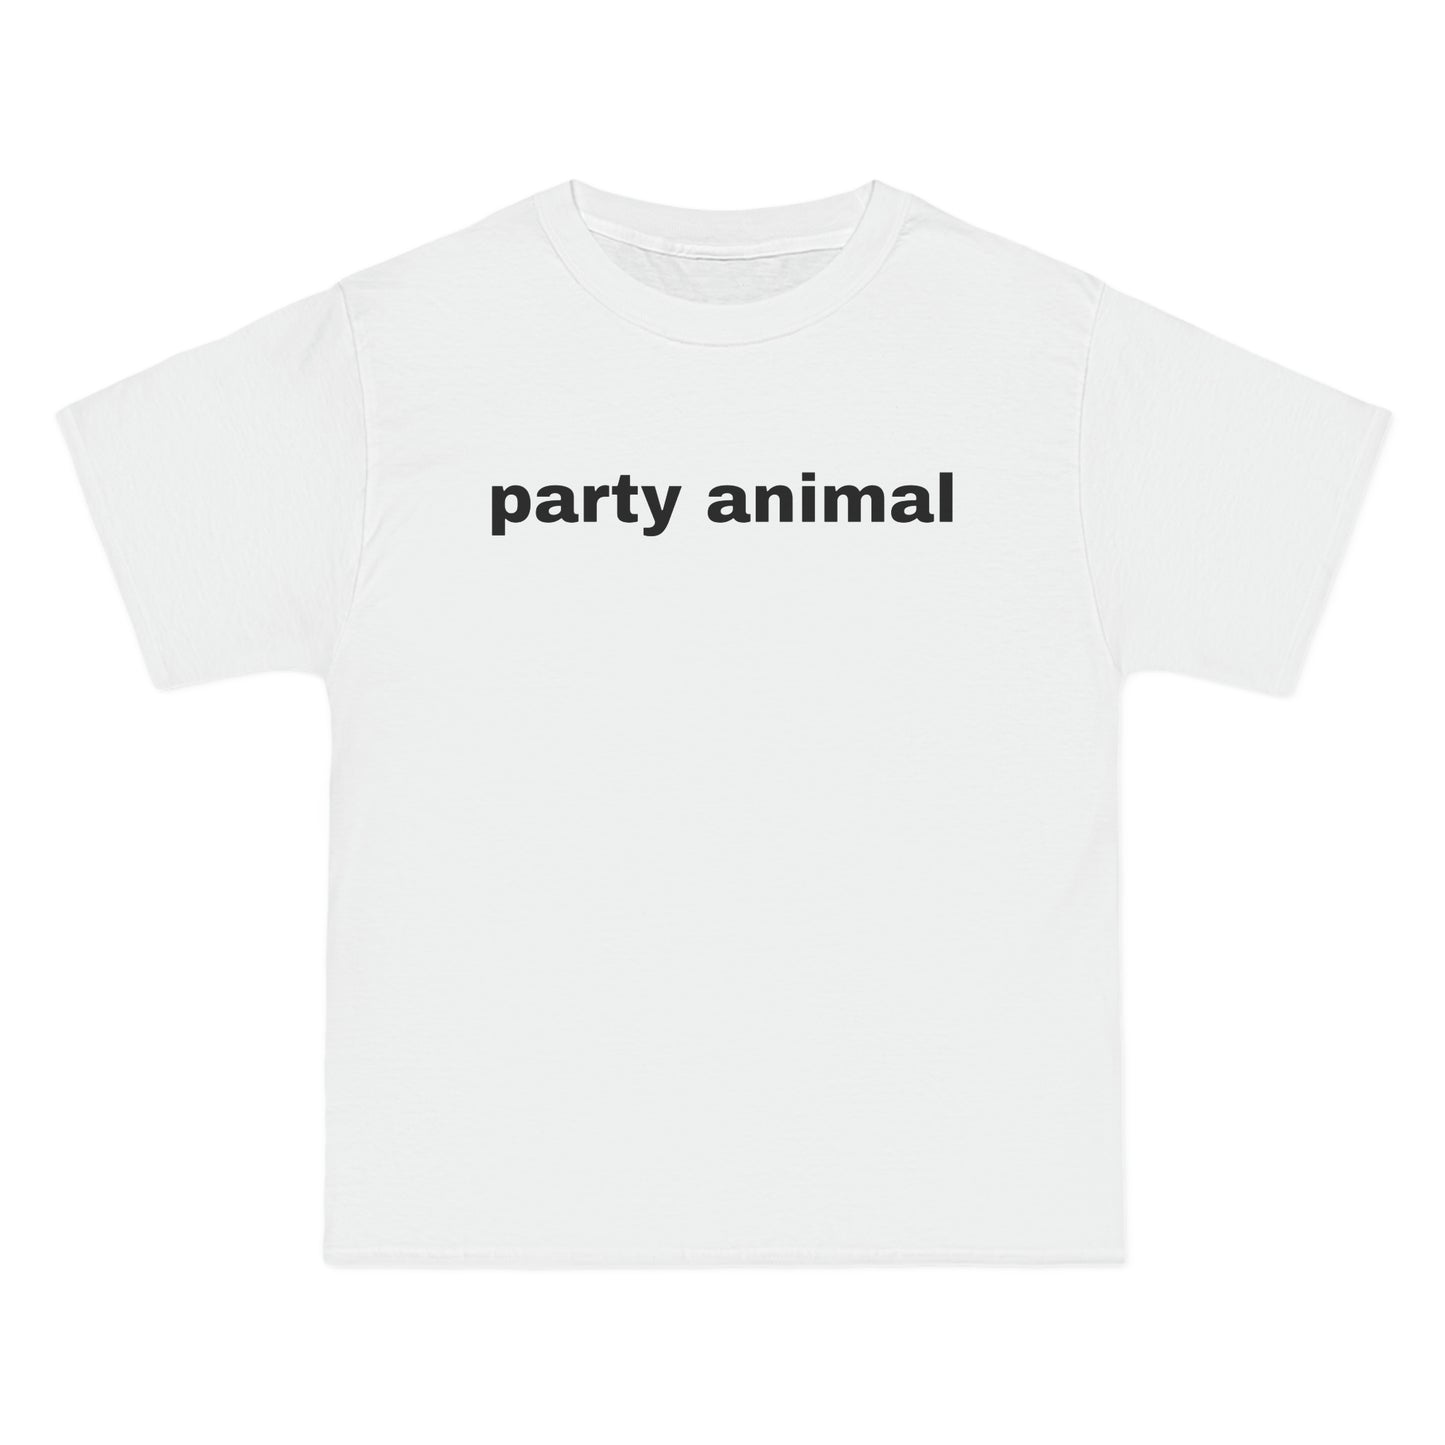 party animal Tee